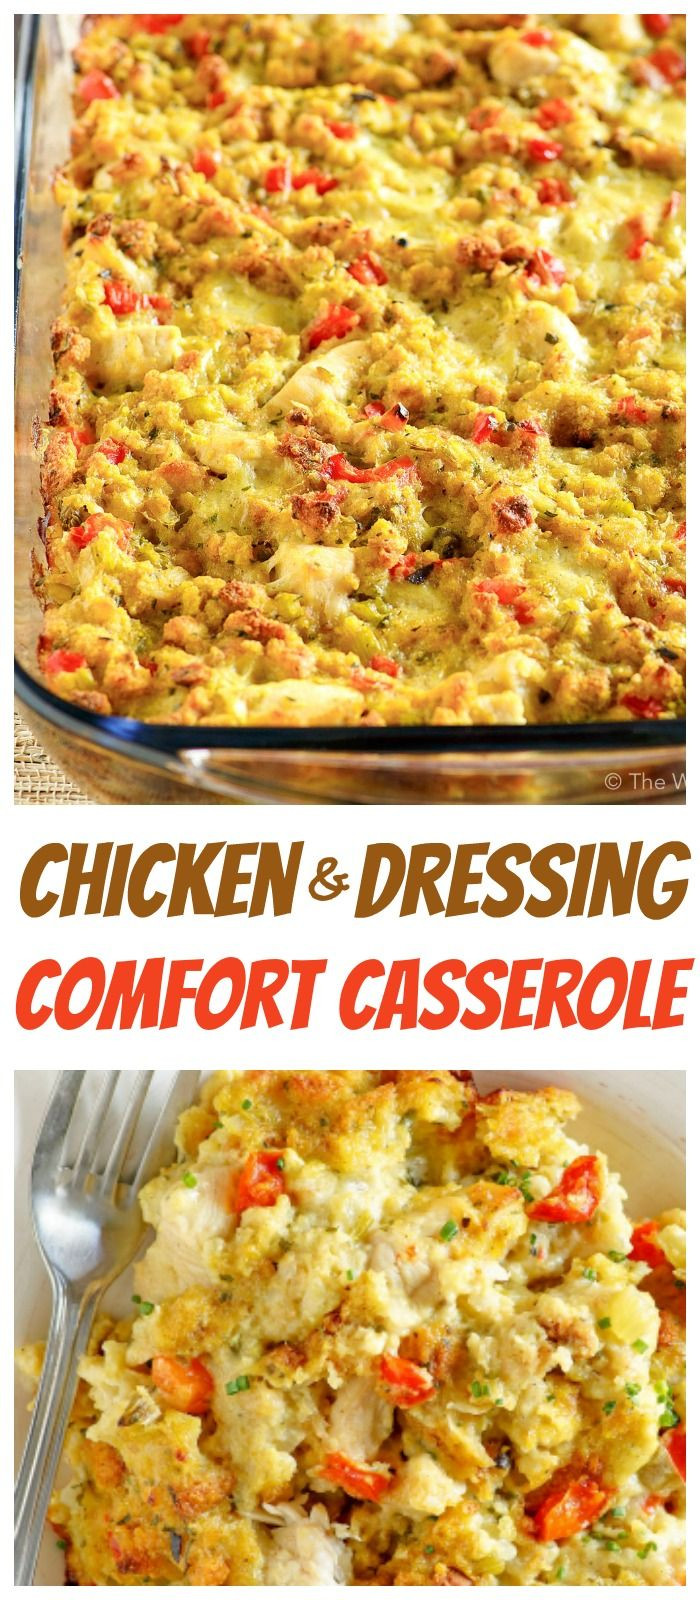 Easy Chicken And Dressing Casserole
 This easy forting Chicken and Dressing Casserole lets